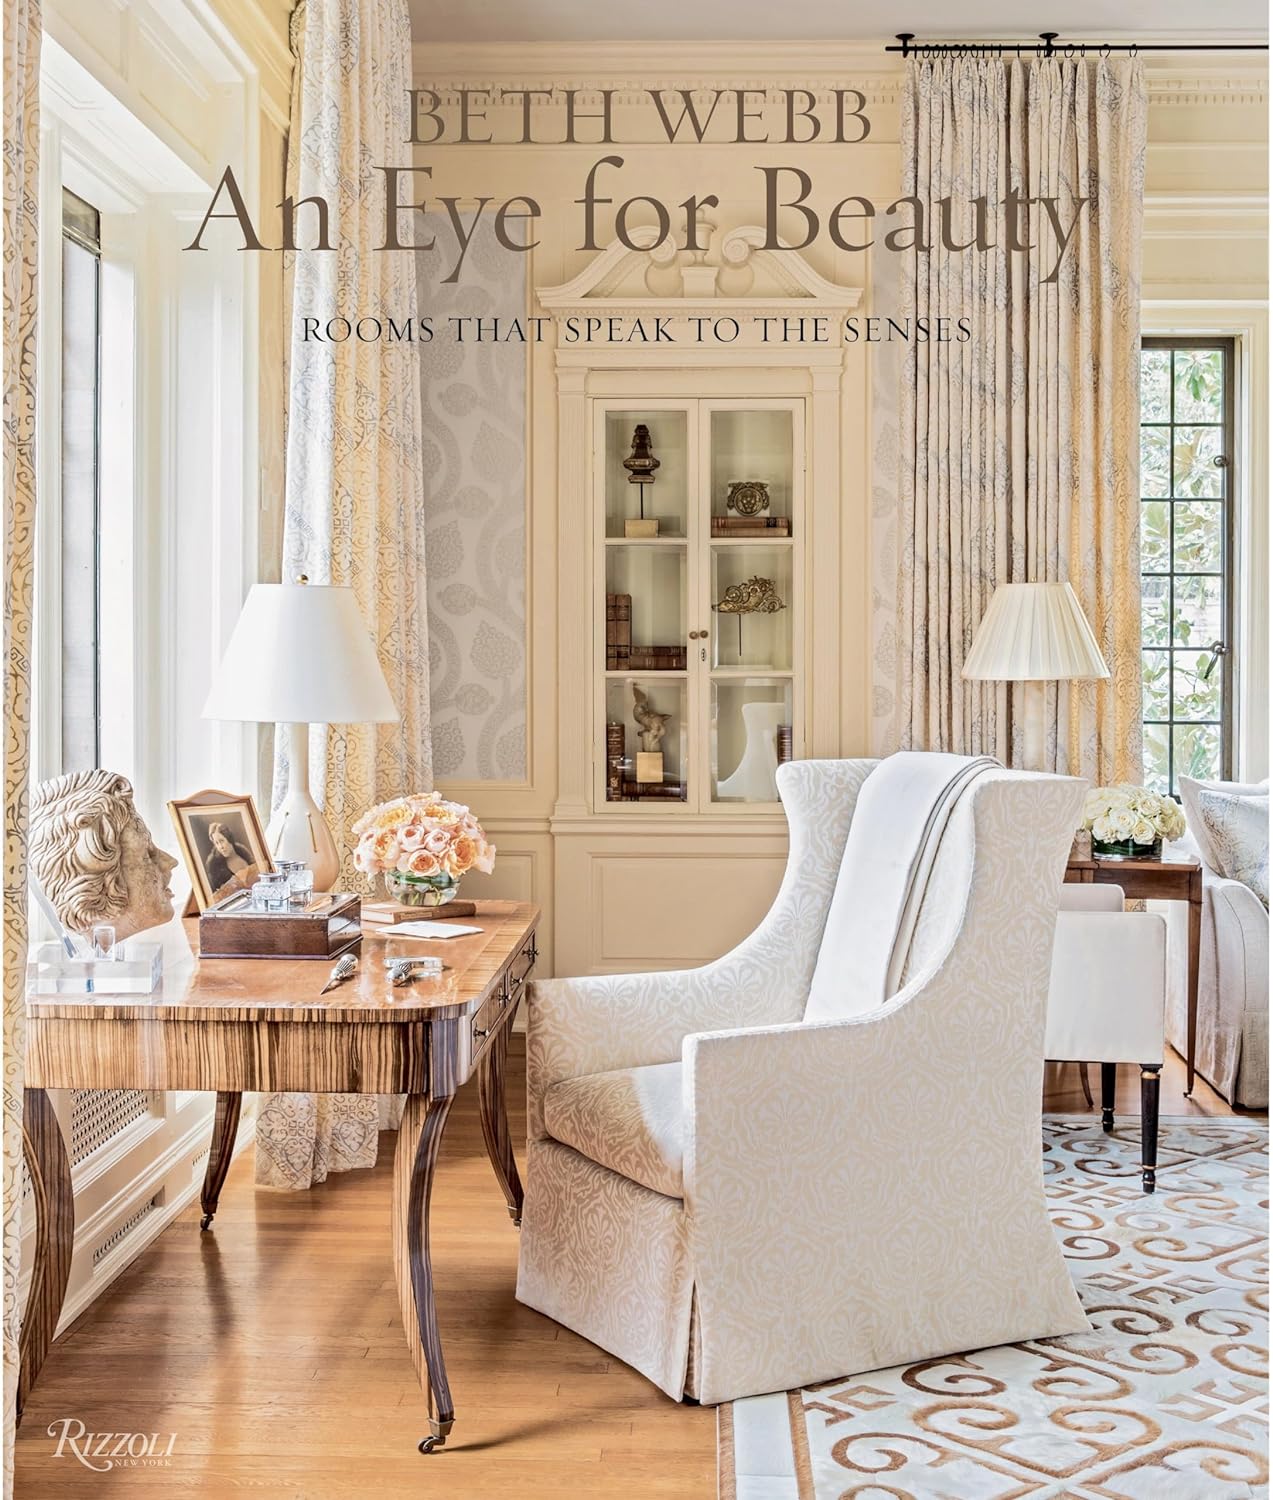 AN EYE FOR BEAUTY by Beth Webb (Rizzoli, 2017) book cover